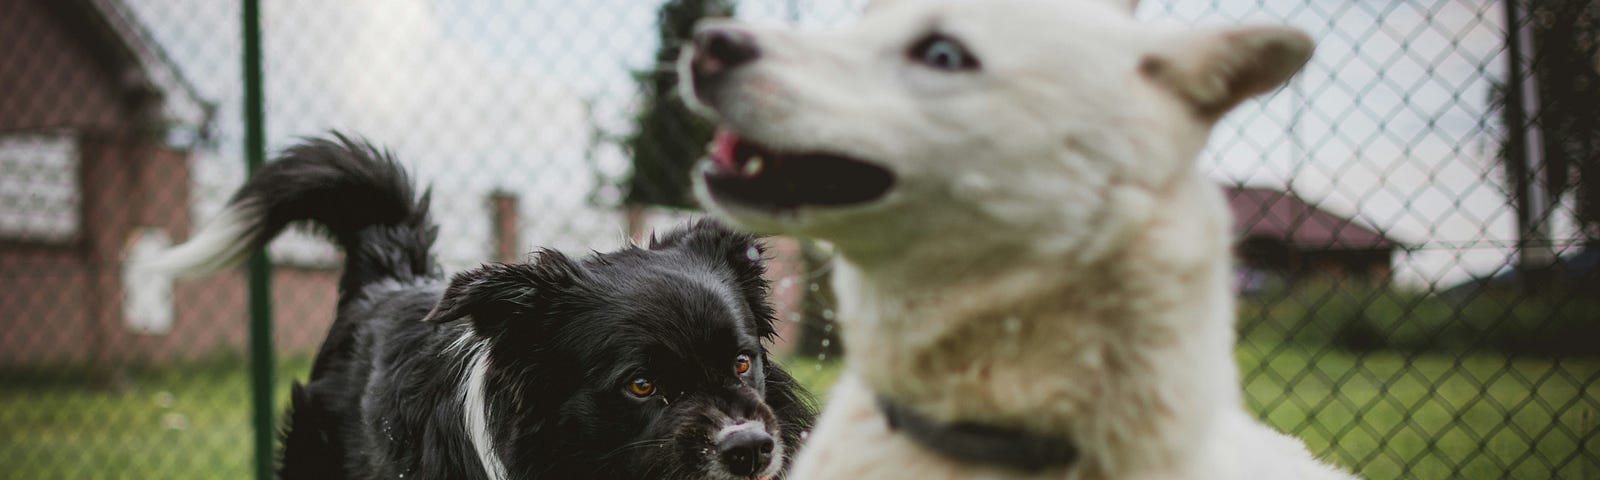 A black and white dog bares its teeth and chases after a white dog.